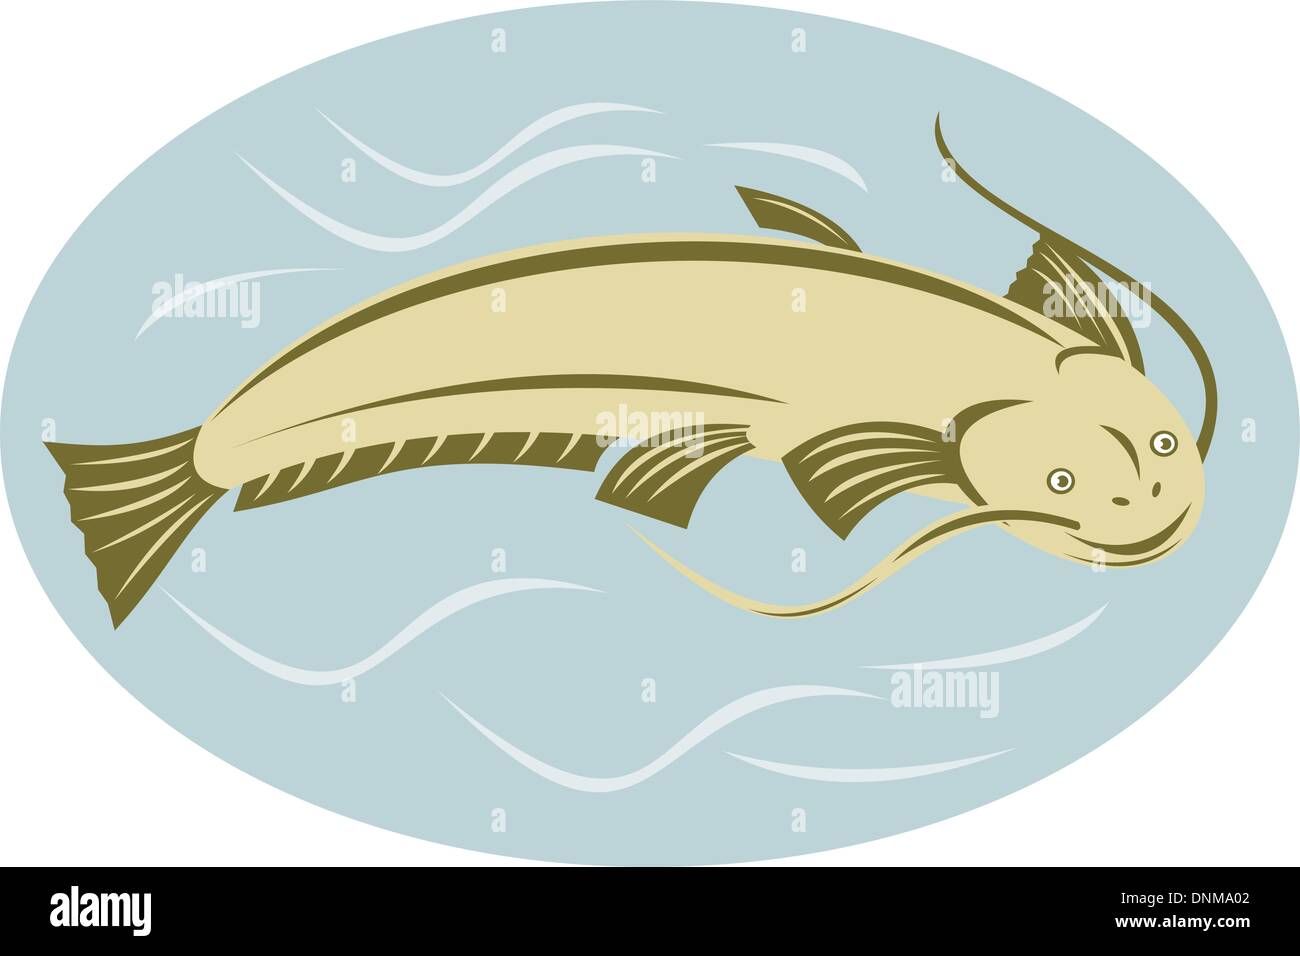 illustration of a catfish jumping done in retro style Stock Vector